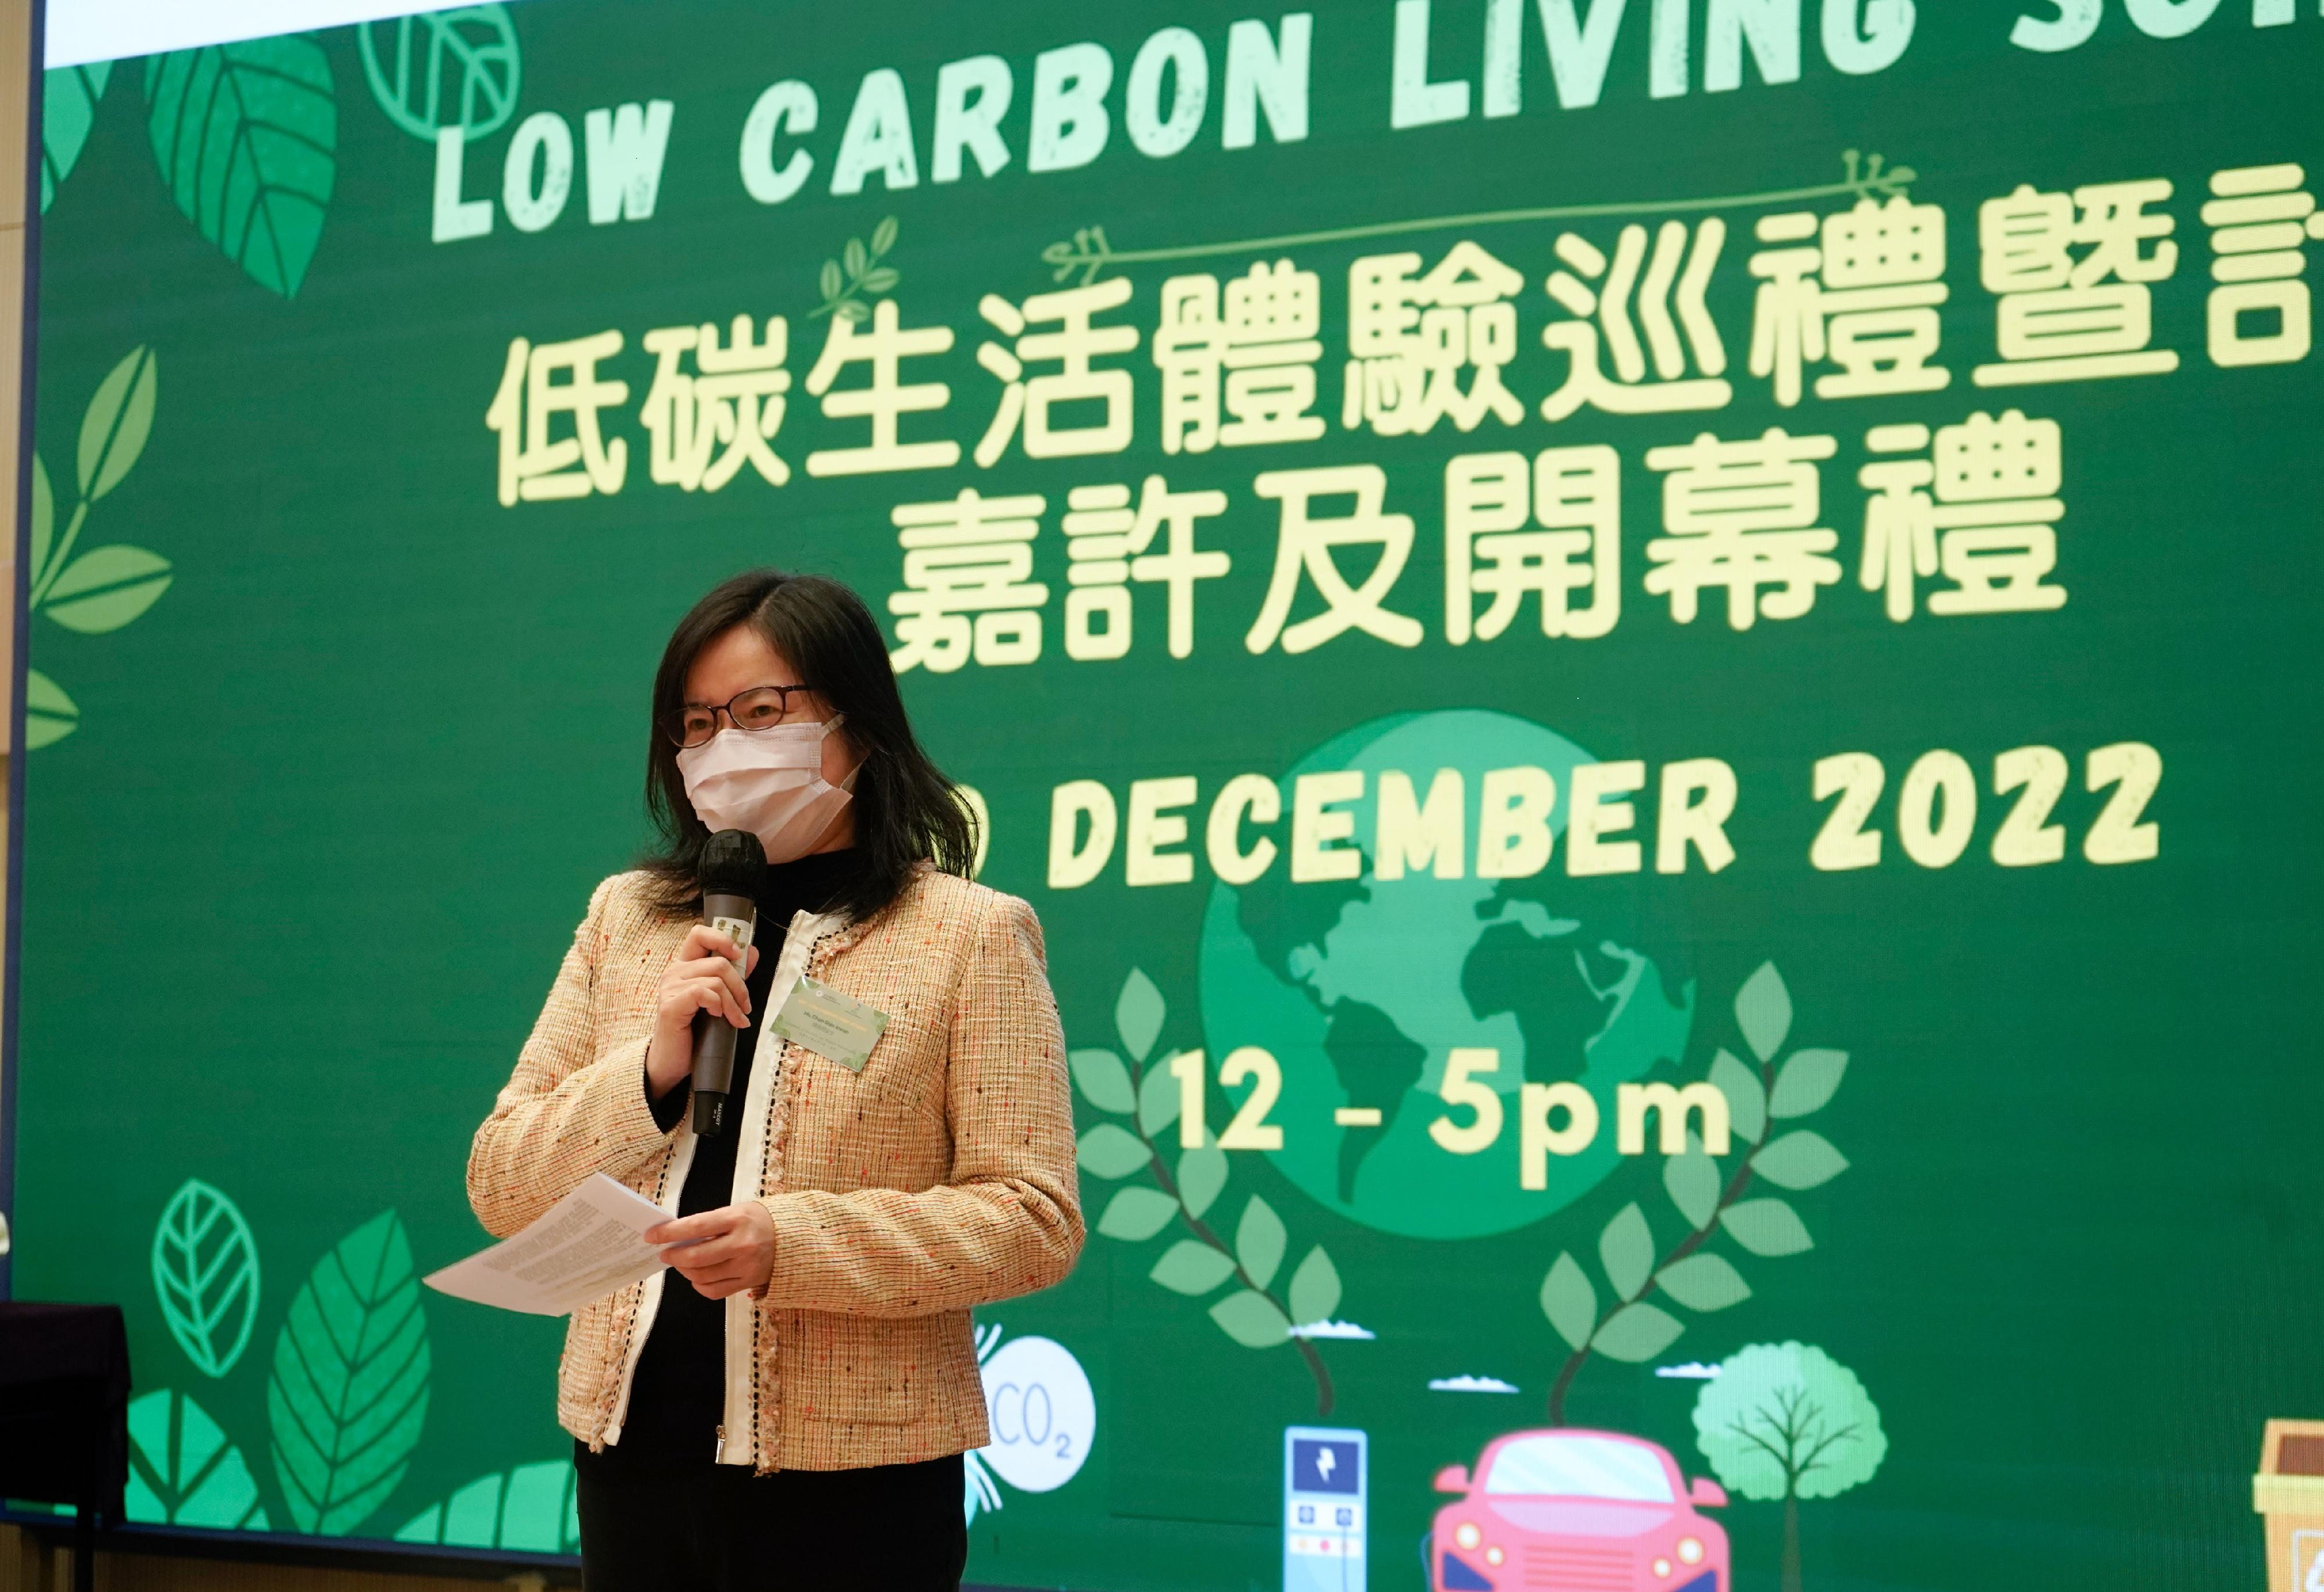 The Opening Ceremony of the Low Carbon Living Scheme, funded by the Council for Sustainable Development (SDC) was held today (December 10). Photo shows the Chairperson of the Education and Publicity Sub-committee of the SDC, Ms Chan Shin-kwan, speaking at the event.